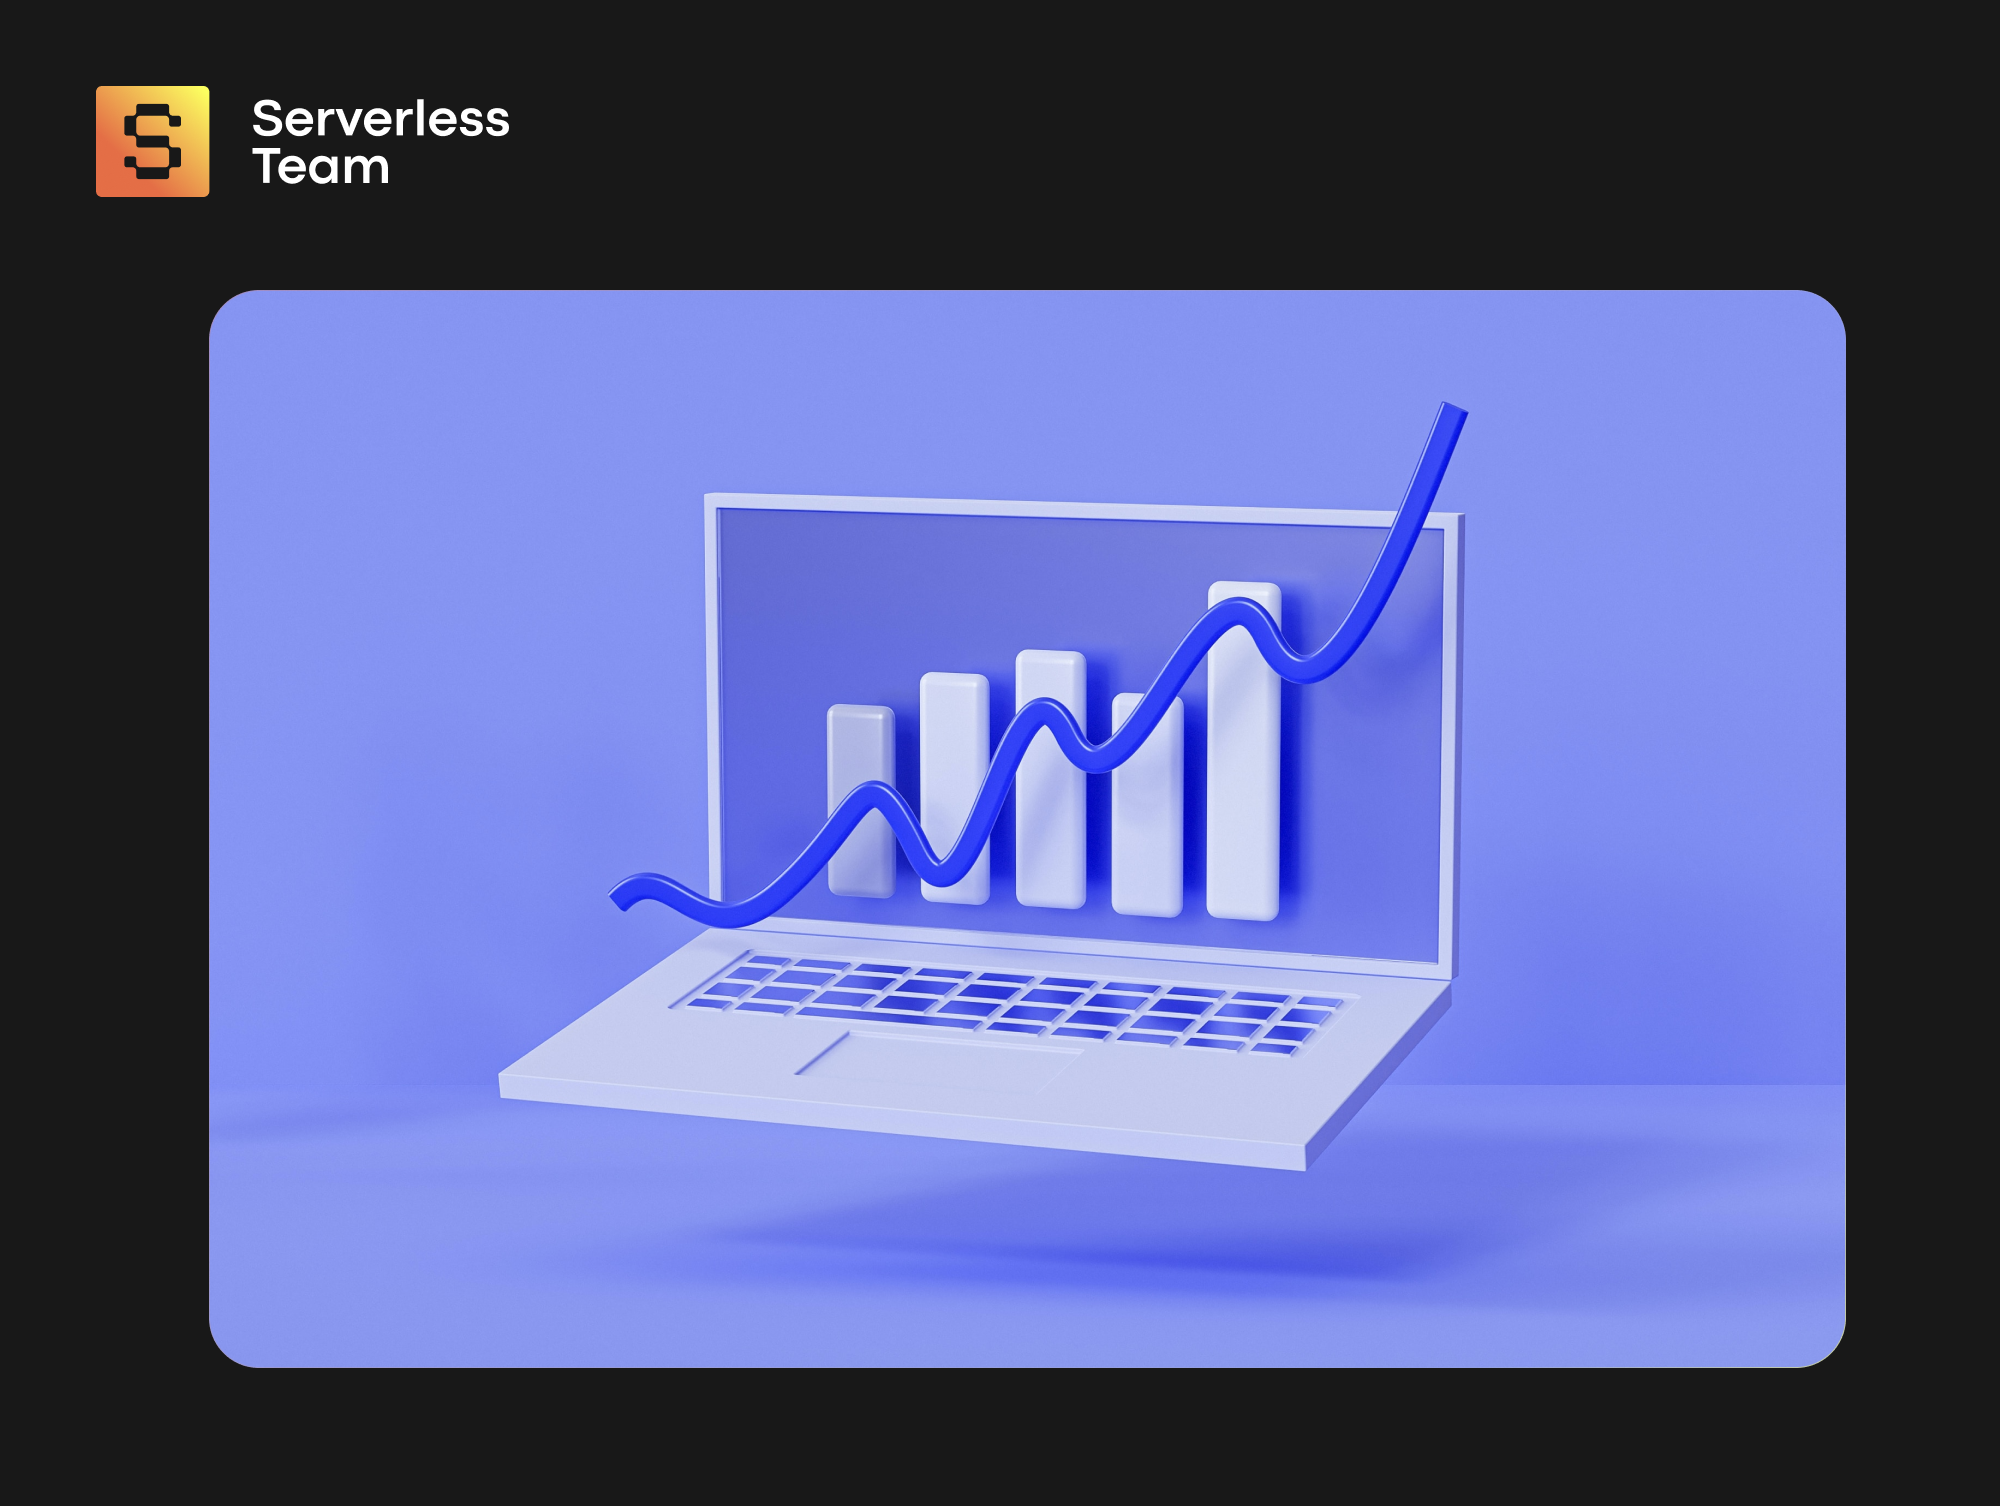 A comprehensive guide abour the pros and cons of serverless architecture for business.